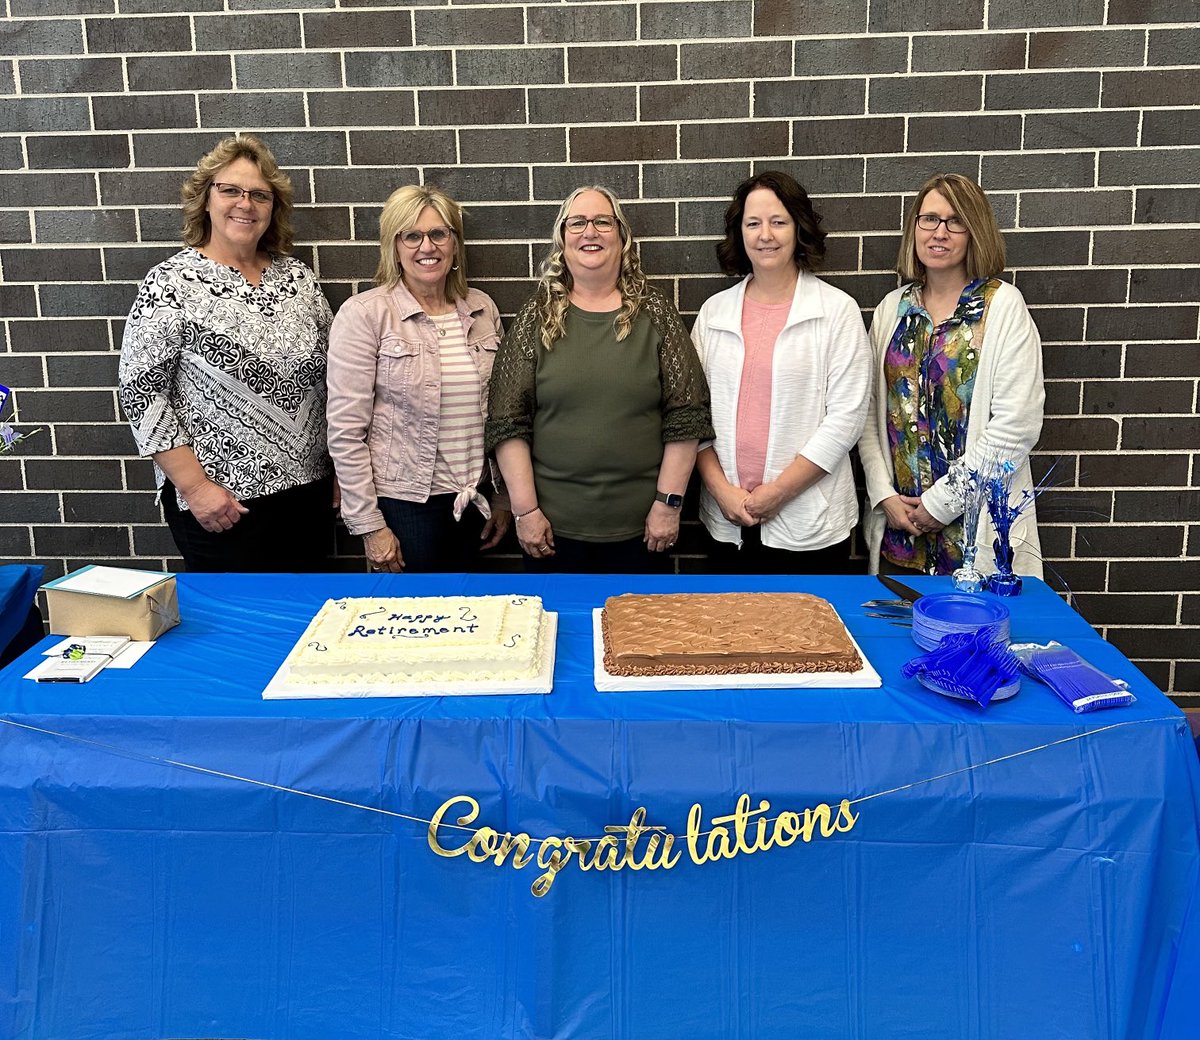 We had the opportunity to celebrate the retirement of these five incredible people! Ms. Starns, Ms. Lindhorst, Ms. Kingston, Ms. Duff, and Ms. Jacobs for your incredible years of service! #blessed #AGRise